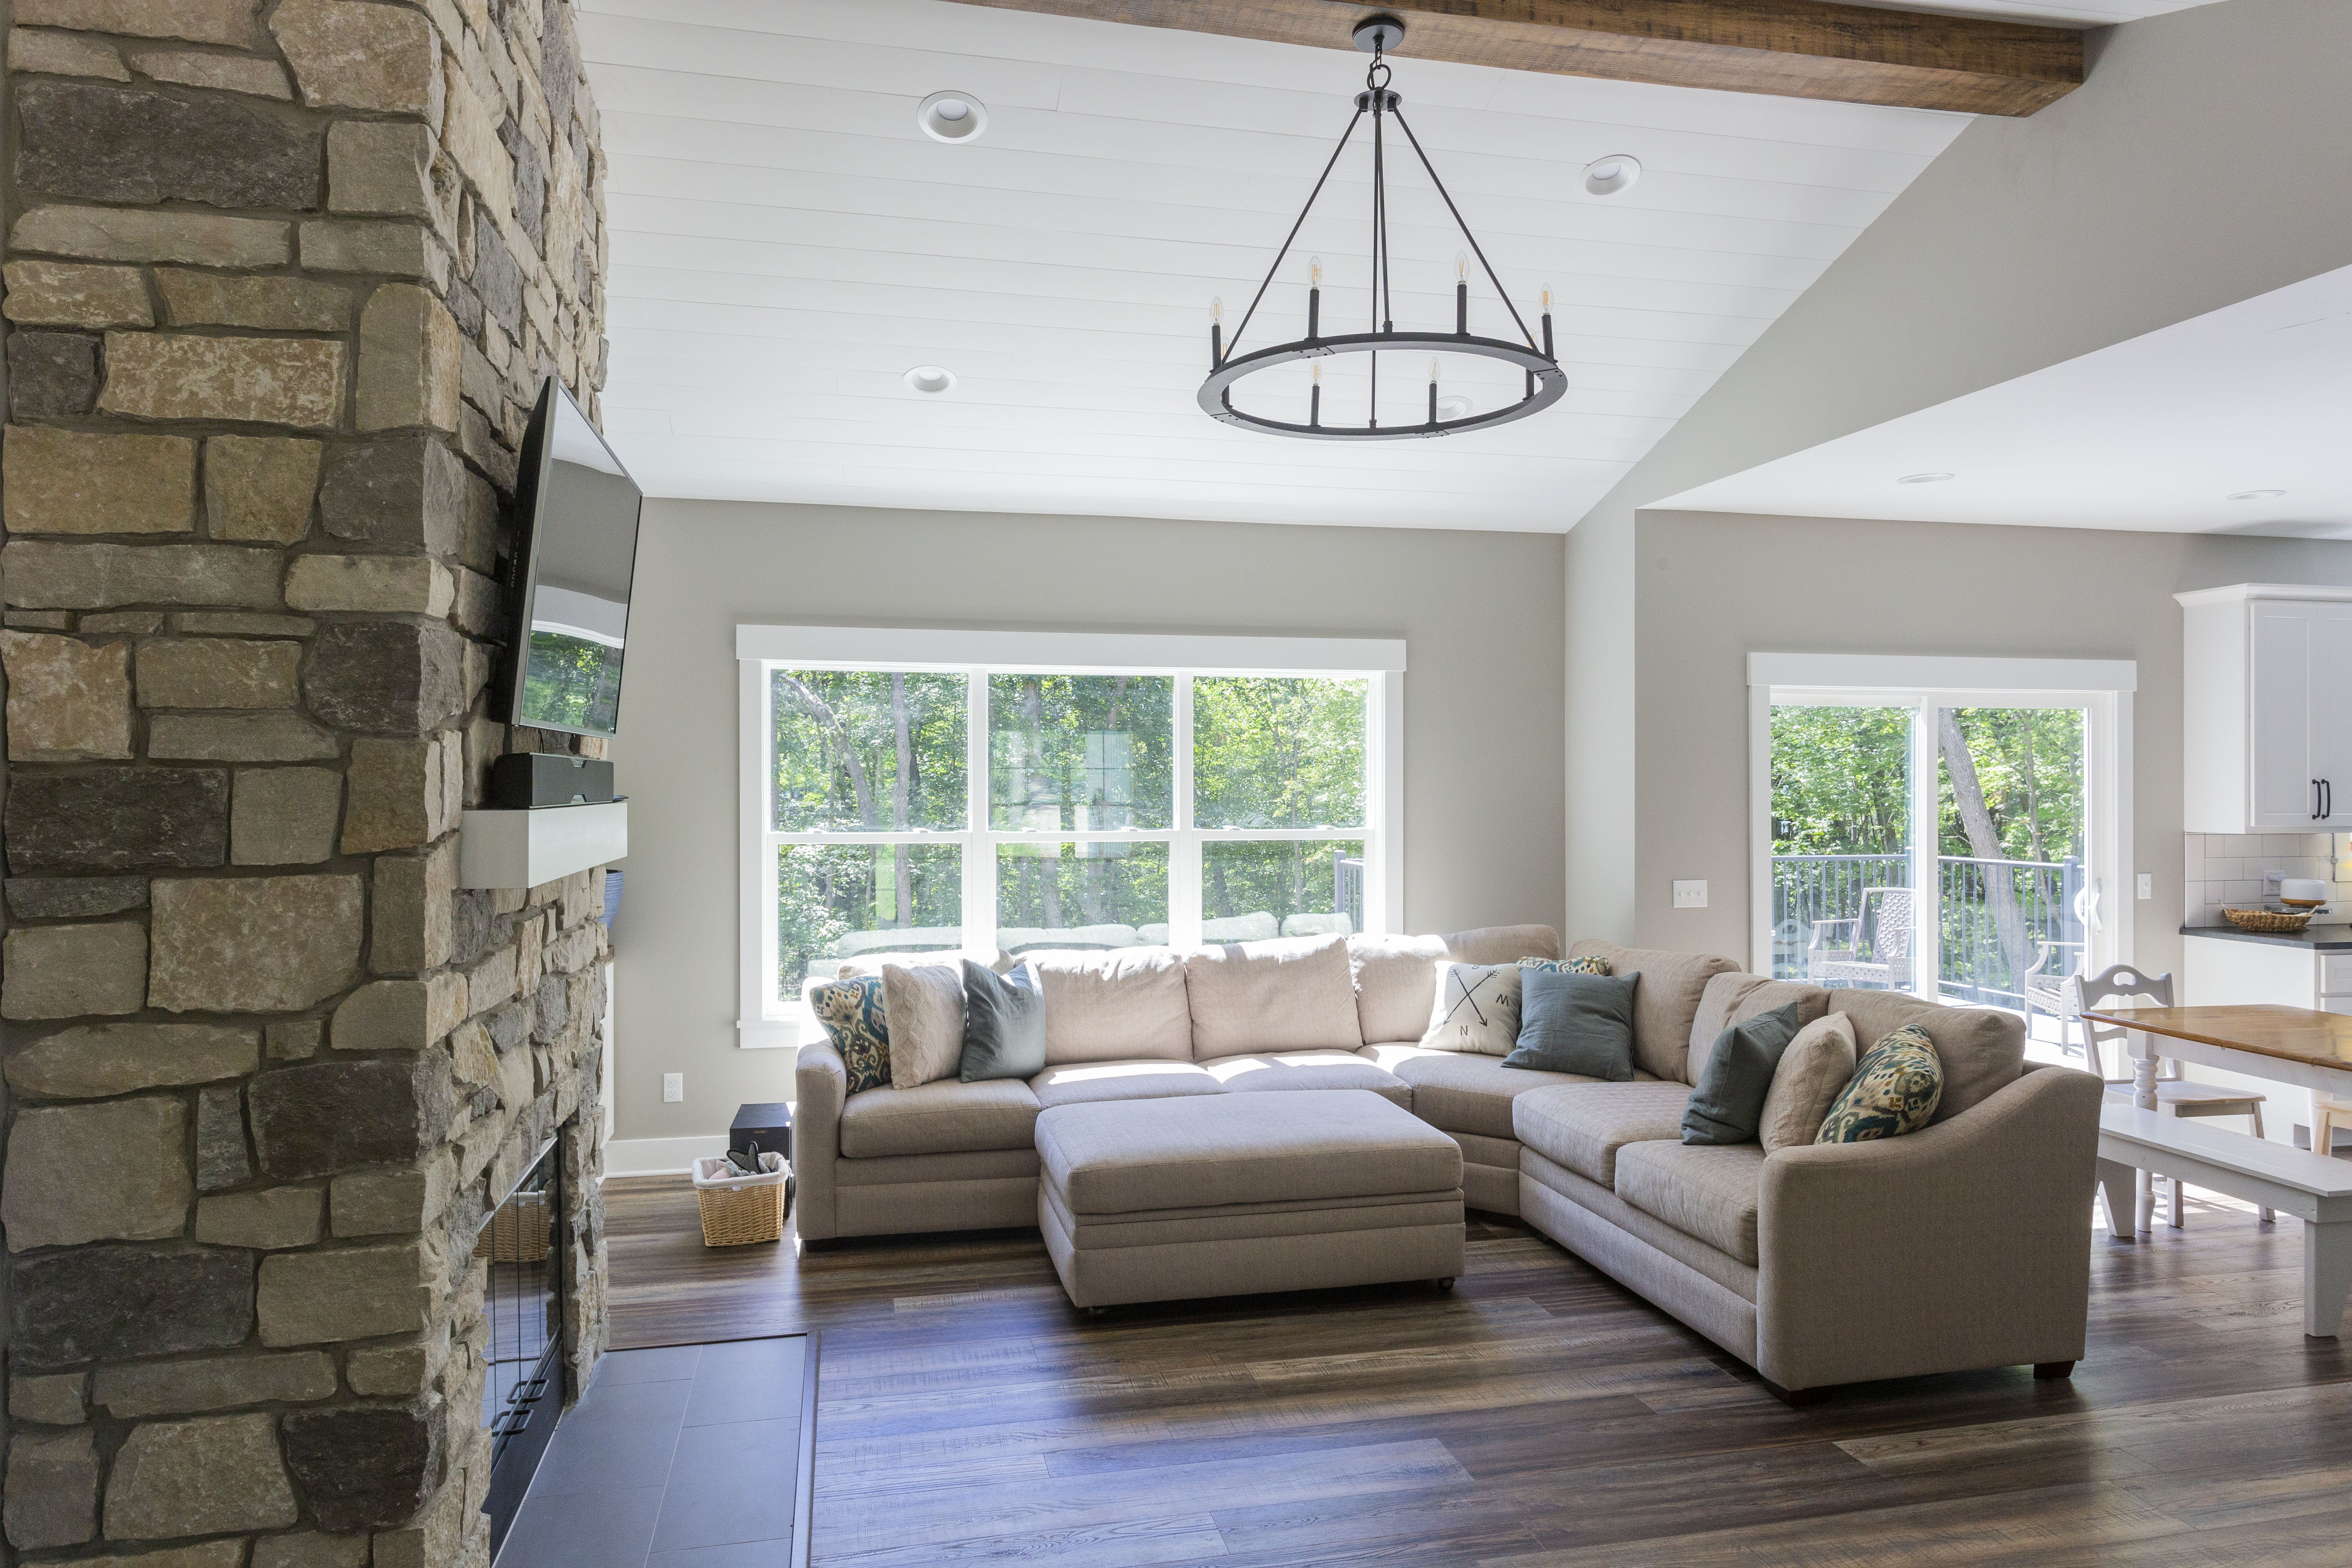 Timeless Shiplap Ceiling With Stone Fireplace in Living Room